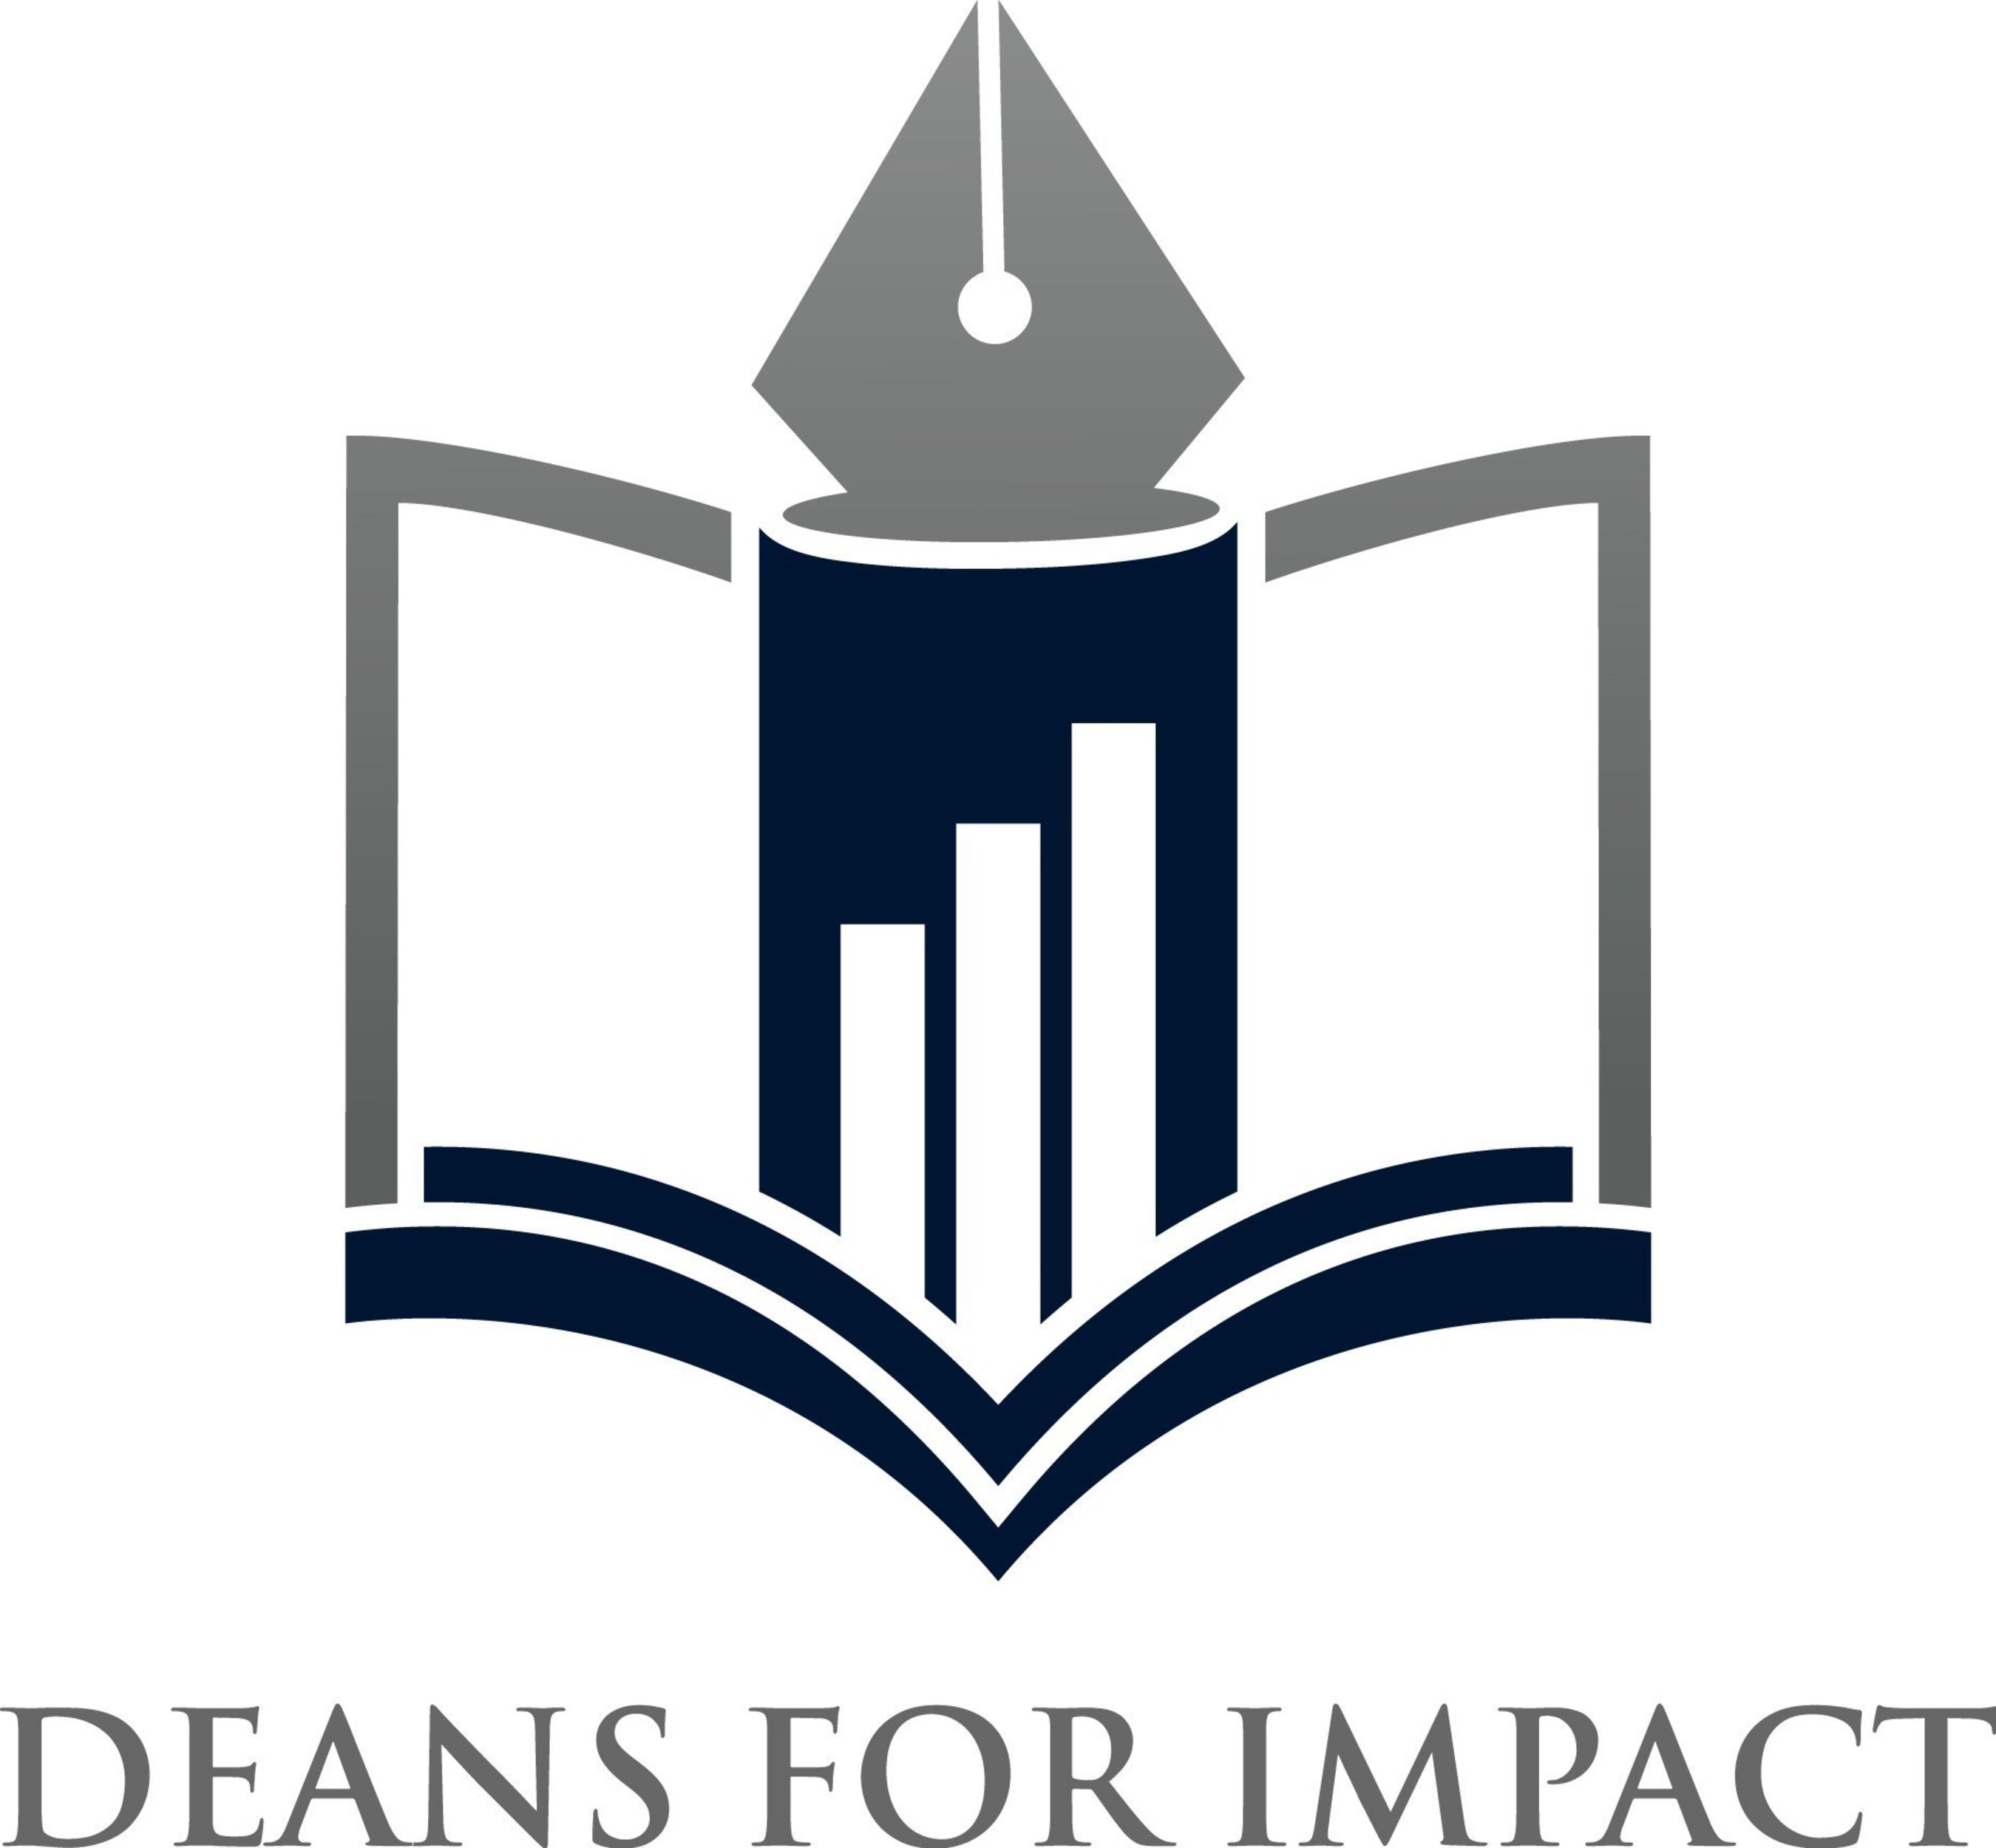 Deans for Impact Logo. More information is available at www.DeansforImpact.org.